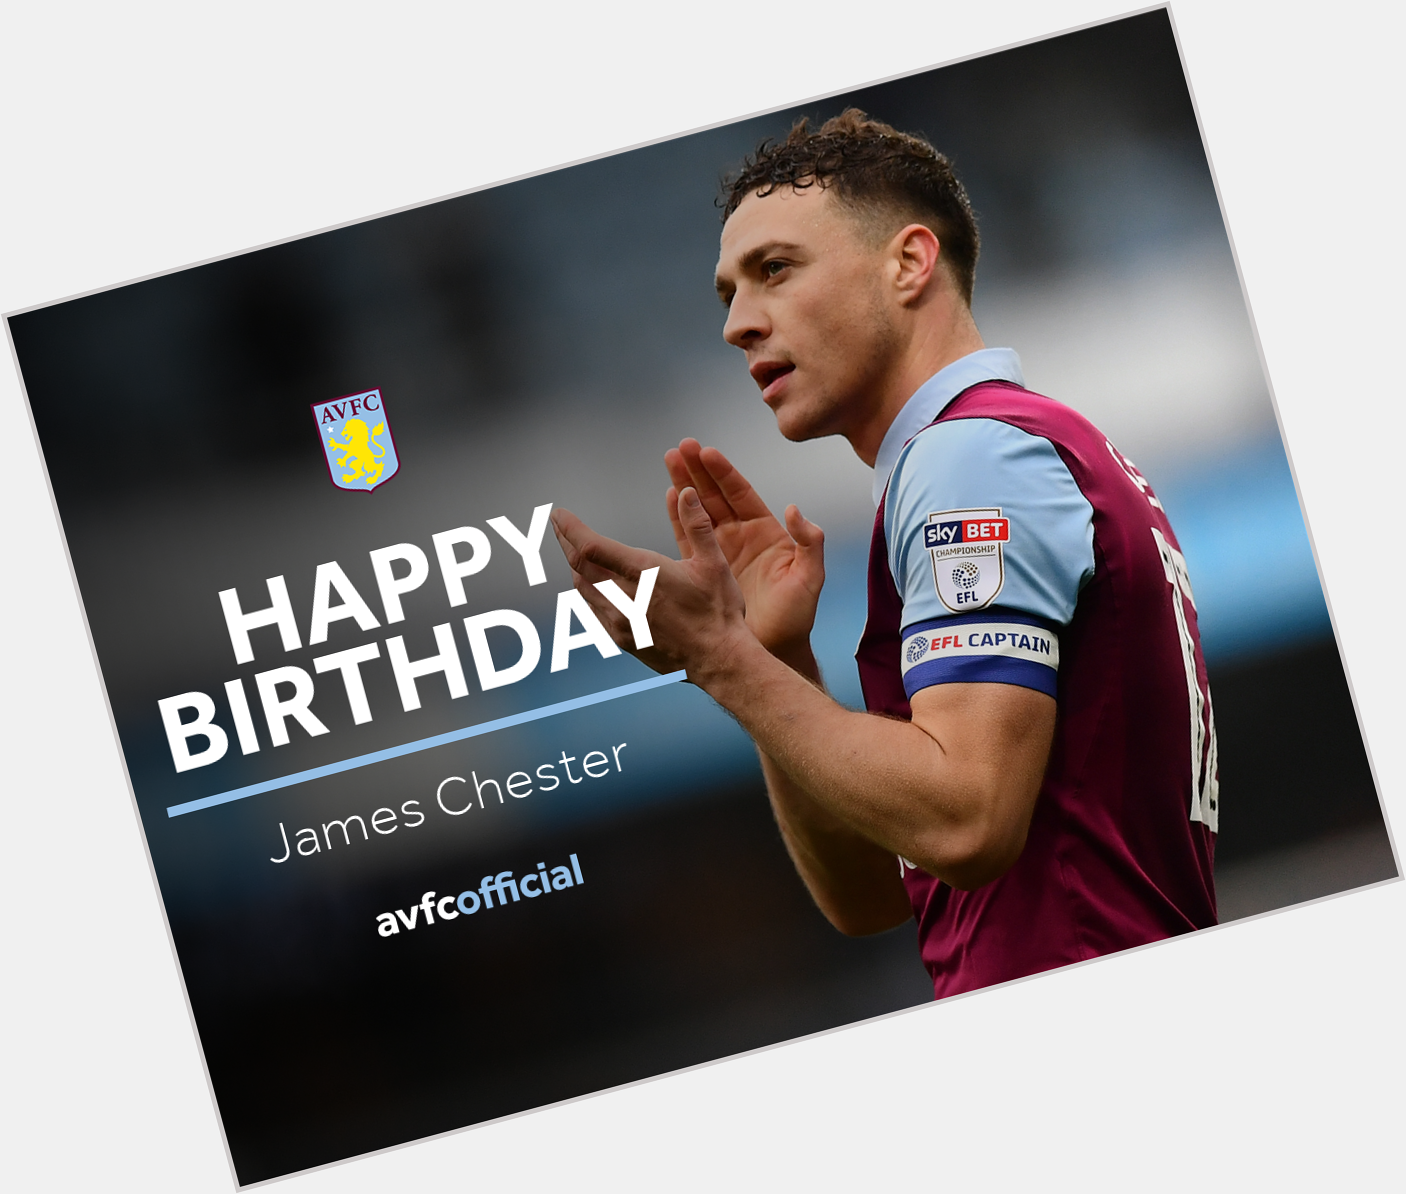   Happy Birthday to the Welsh rock that is, James Chester!

Have a great day James! 